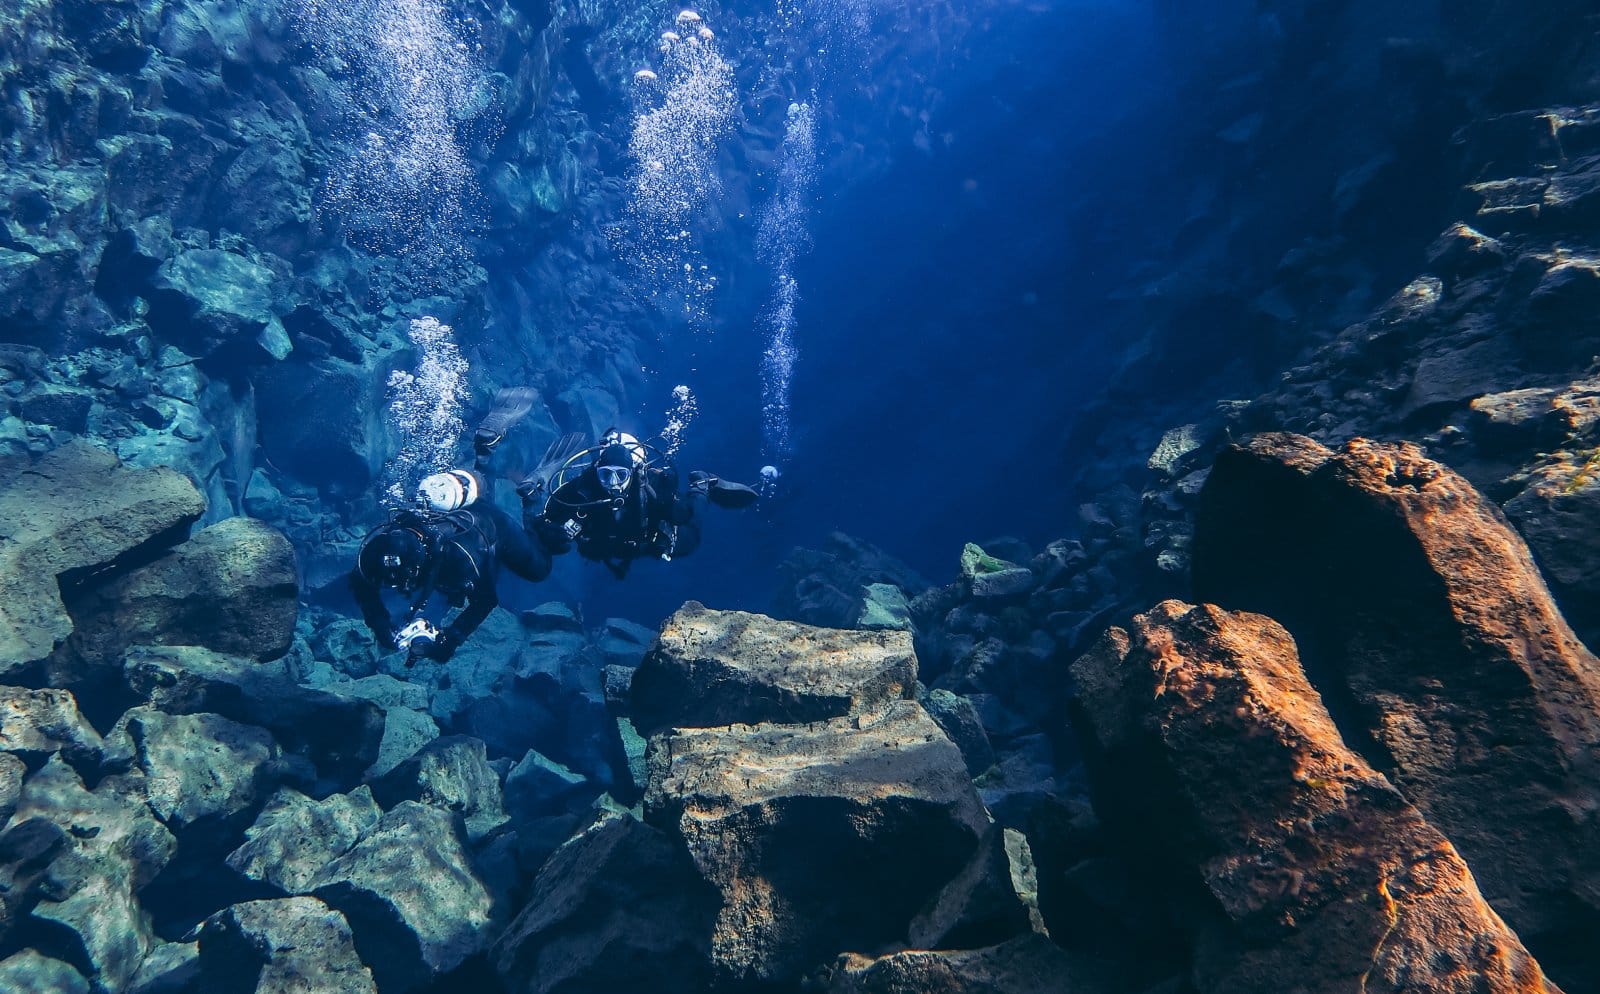 <p class="wp-caption-text">Image Credit: Shutterstock / VicPhotoria</p>  <p><span>The PADI Discover Scuba Diving experience is an introductory dive for those curious about scuba diving but not yet ready to commit to a certification course. This program is designed to familiarize novices with the basic principles and procedures needed to dive under the direct supervision of a PADI Professional.</span></p> <p><span>Participants learn about the equipment used in scuba diving, basic safety rules, and how to breathe underwater. The experience typically includes a brief theory session, a pool or confined water dive to practice basic skills, and an optional open water dive. It’s an opportunity to explore underwater in a controlled and safe environment, making it an excellent first step for those intrigued by the marine world.</span></p> <p><b>Insider’s Tip:</b><span> Choose a dive center or location that offers access to vibrant underwater environments, even at shallow depths. This ensures that your Discover Scuba Diving experience is educational and visually stunning, enhancing the excitement and enjoyment of your first dive. Some locations provide encounters with remarkable marine life or underwater sculptures, making your dive unforgettable.</span></p>